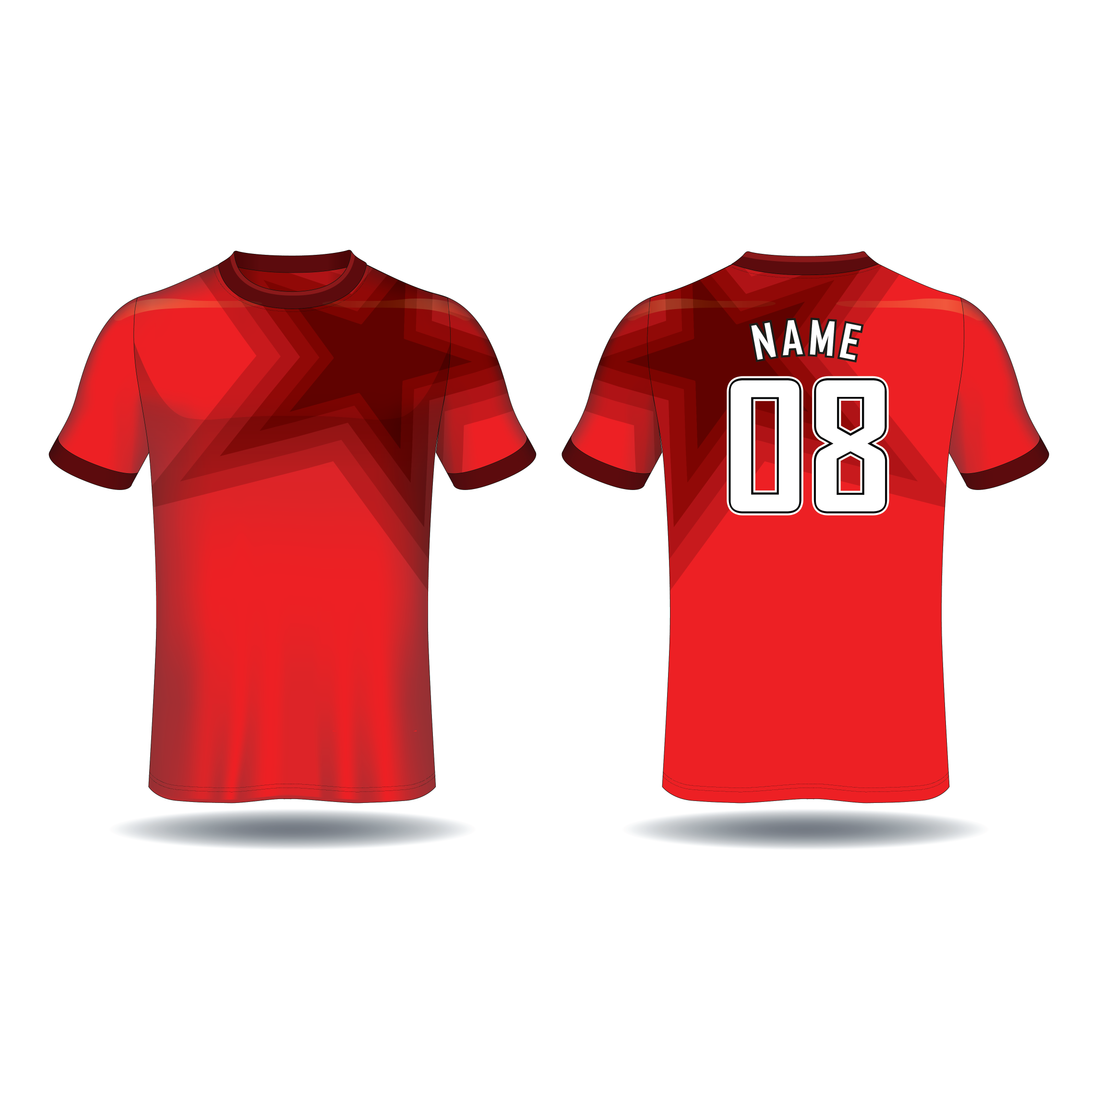 NEXT PRINT All Over Printed Customized Sublimation T-Shirt Unisex Sports Jersey Player Name & Number, Team Name NP50000282